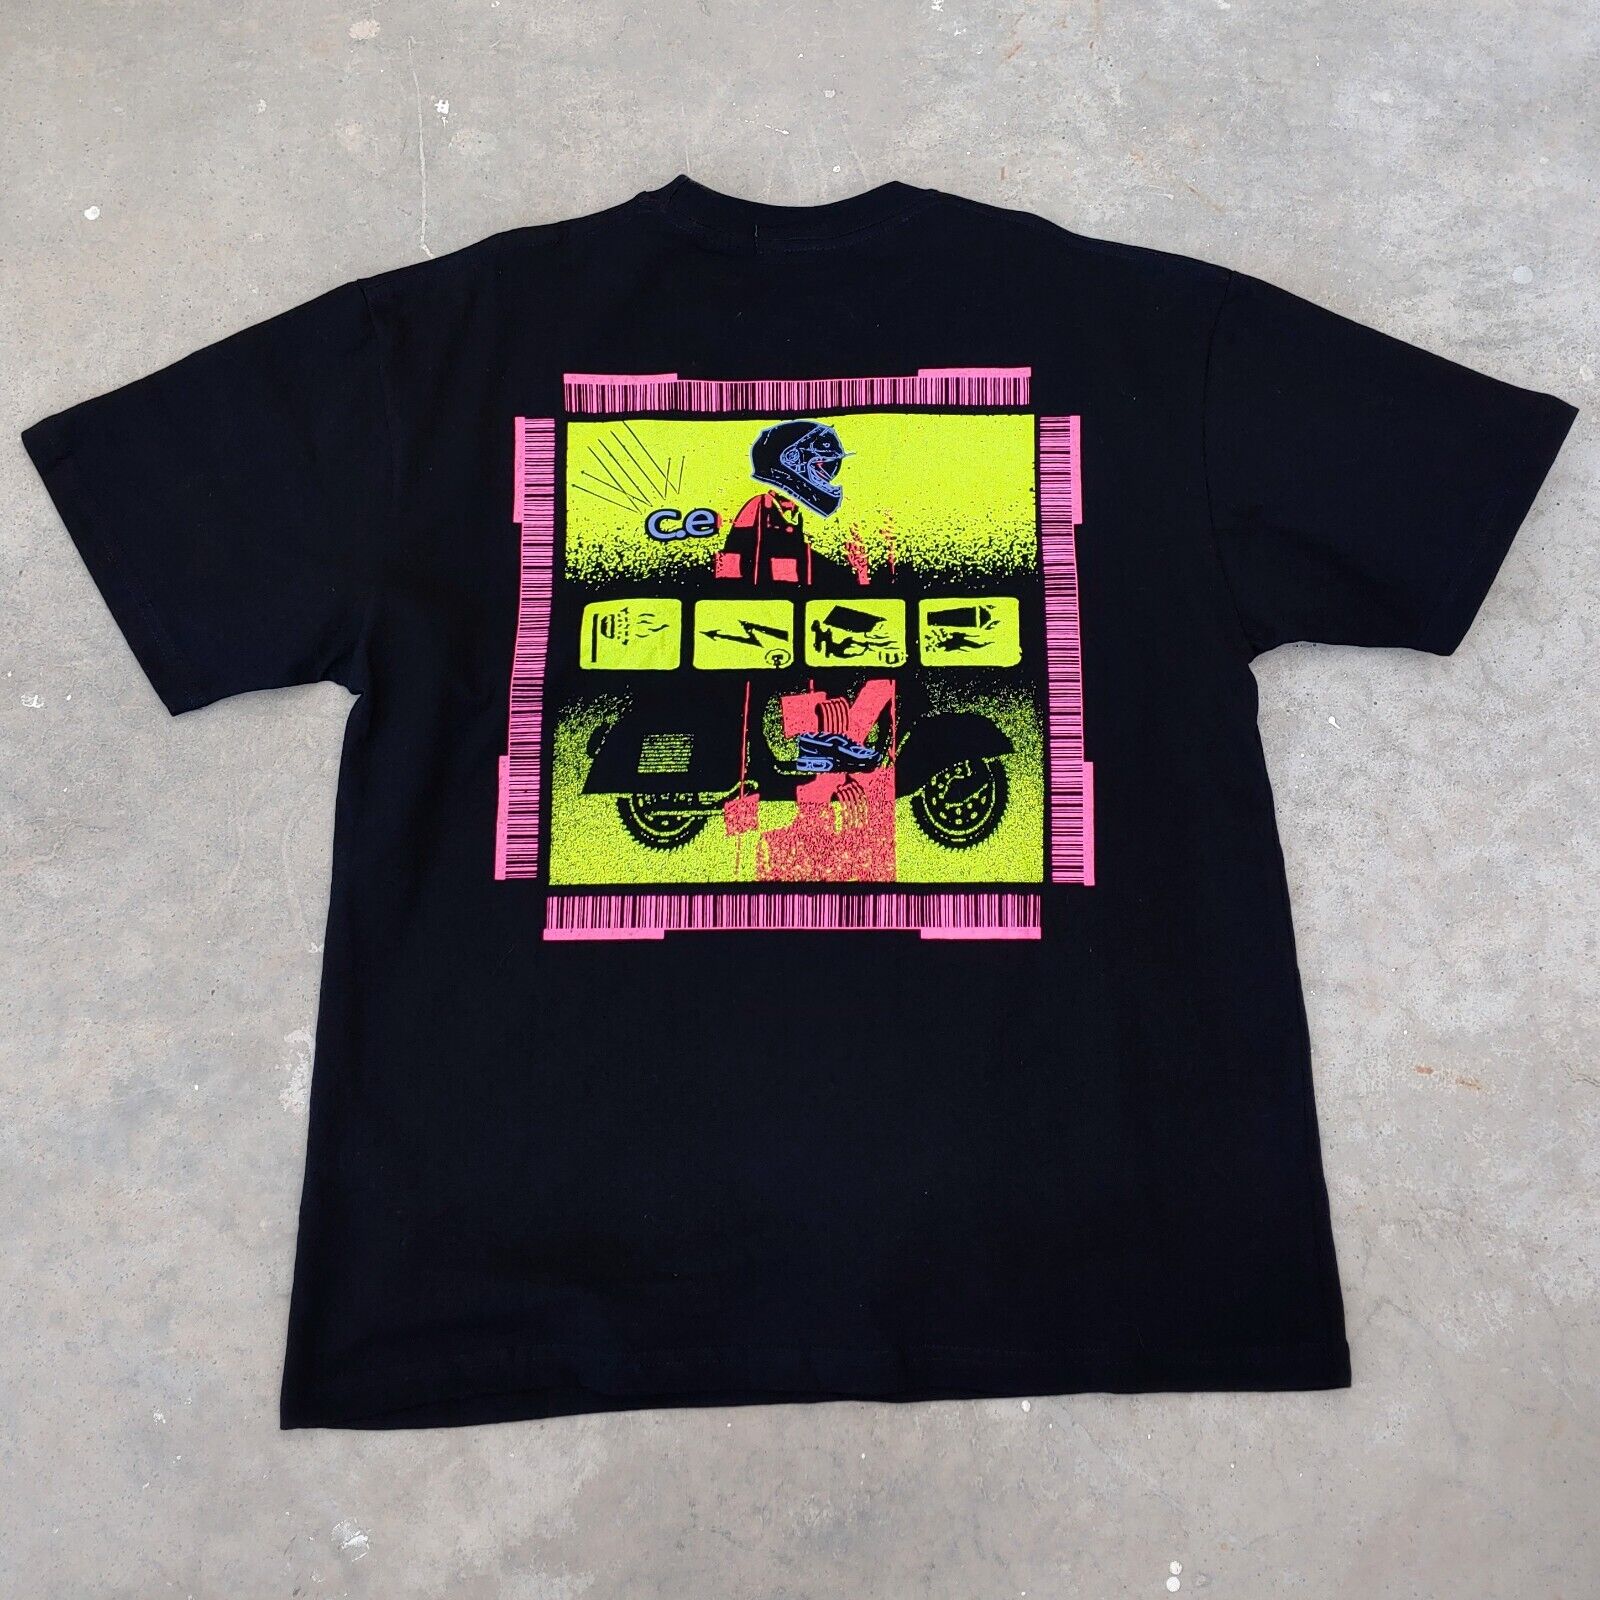 Cav Empt 2020 Potlatch Limited Black Graphic Tee Size XL NWT Made